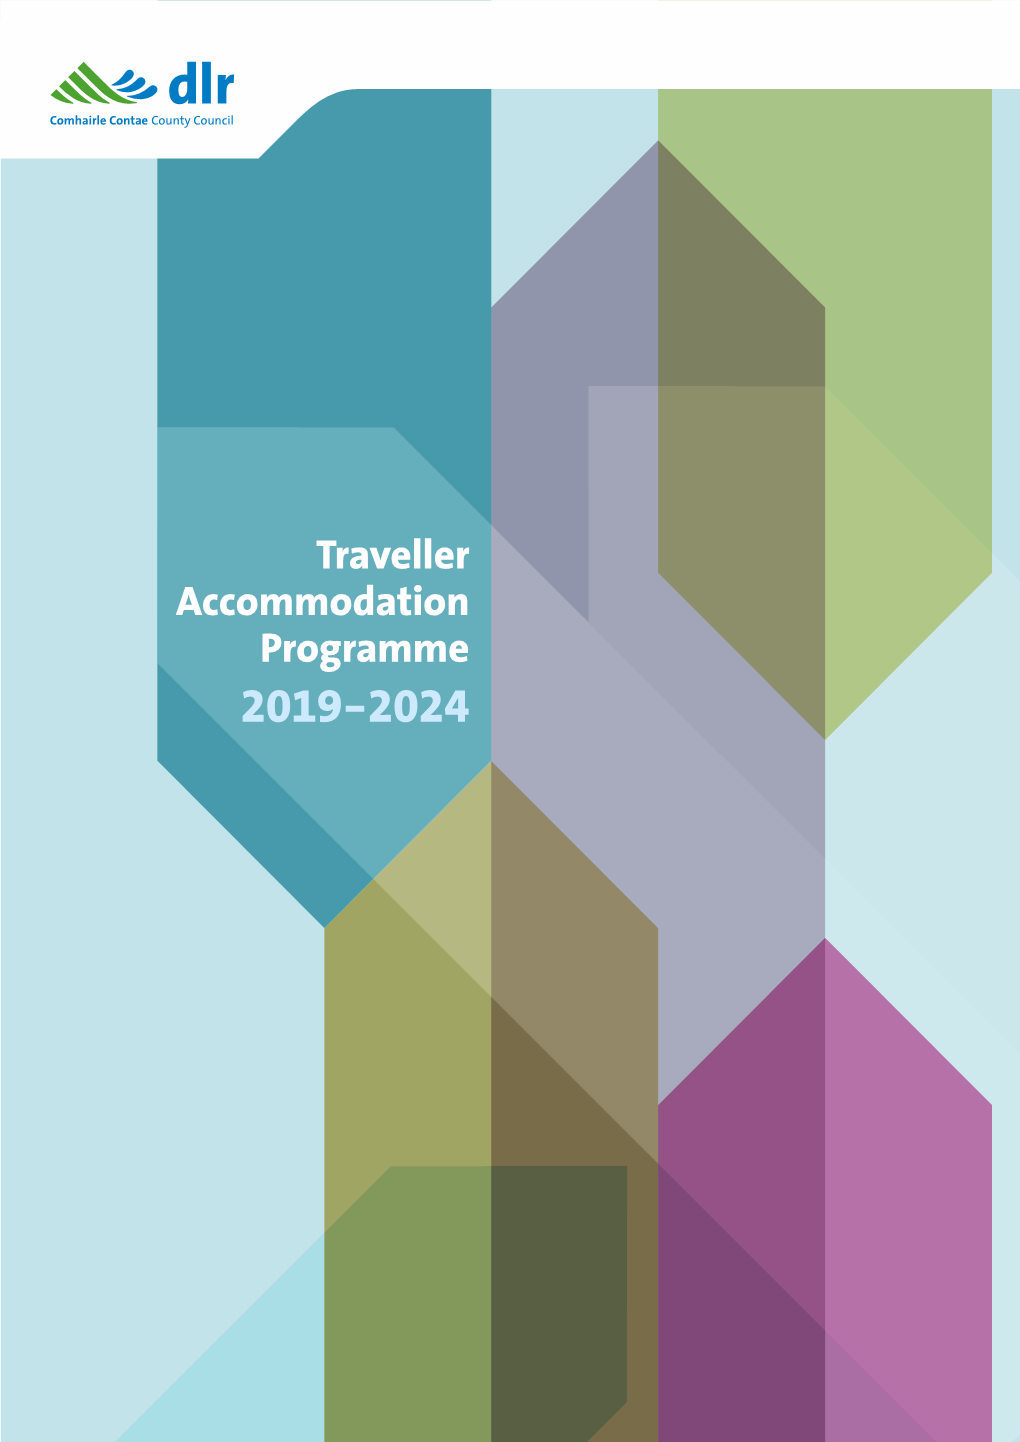 Adopted Traveller Accommodation Programme 2019-2024